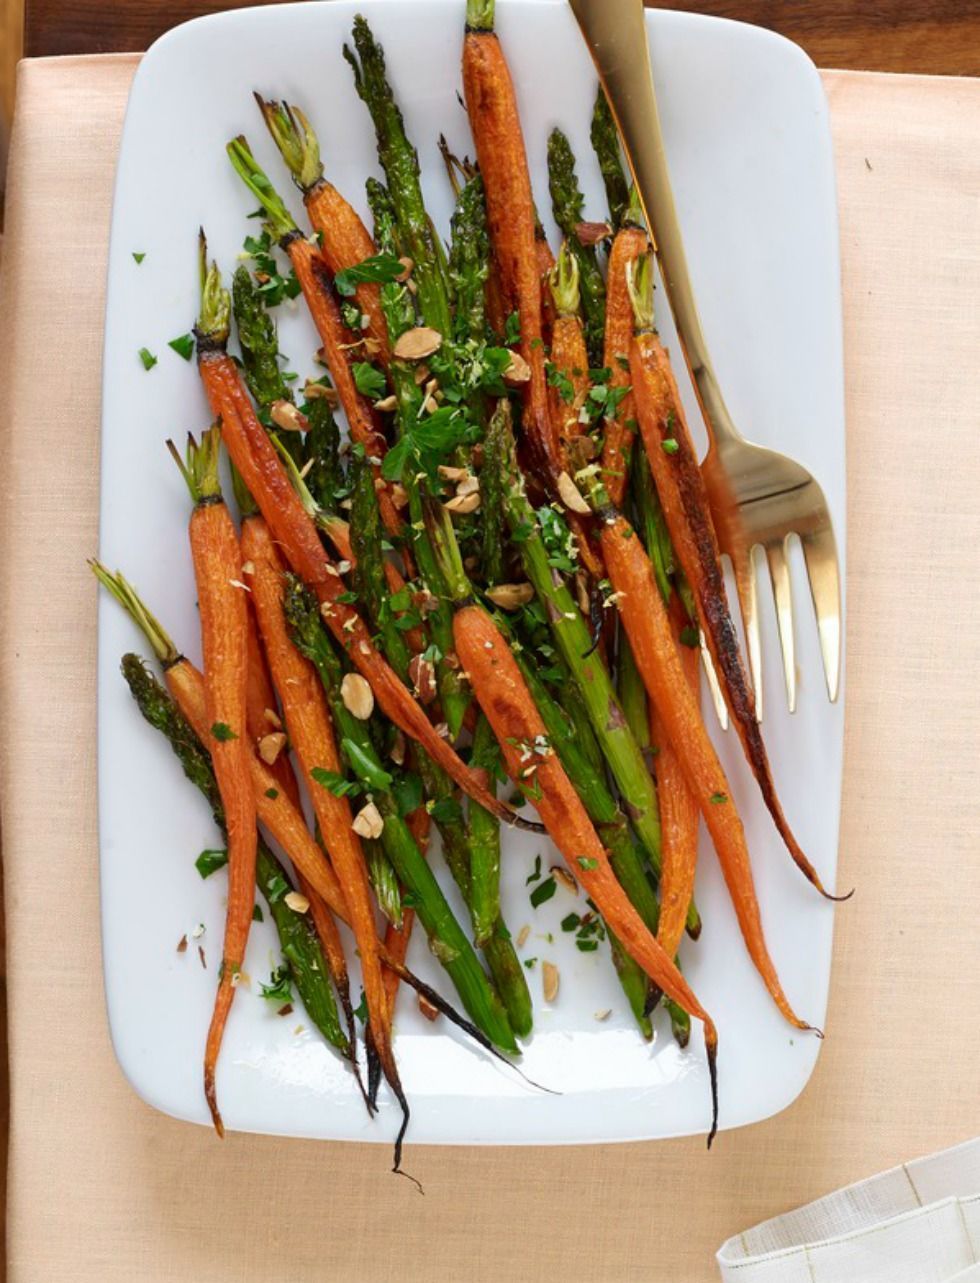 Recipe for roasted carrots and asparagus with almond gremolata.